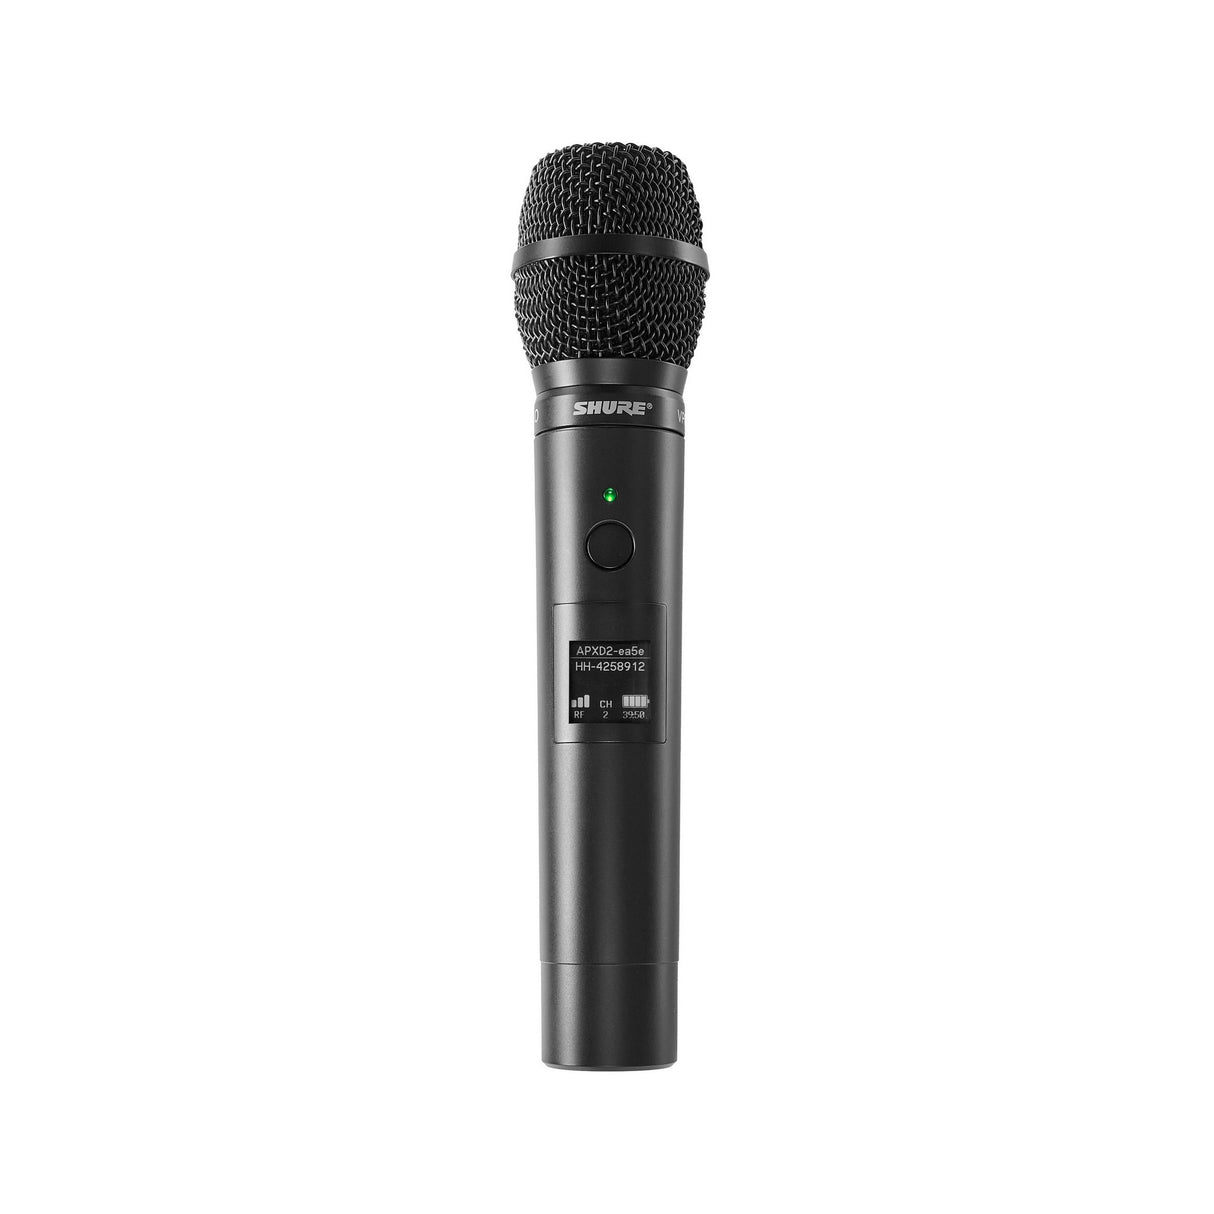 Shure MXW2X/VP68 Rechargeable Handheld Transmitter with SM86 Capsule for MXW neXt 2 Systems, Z10 1920-1930 MHz